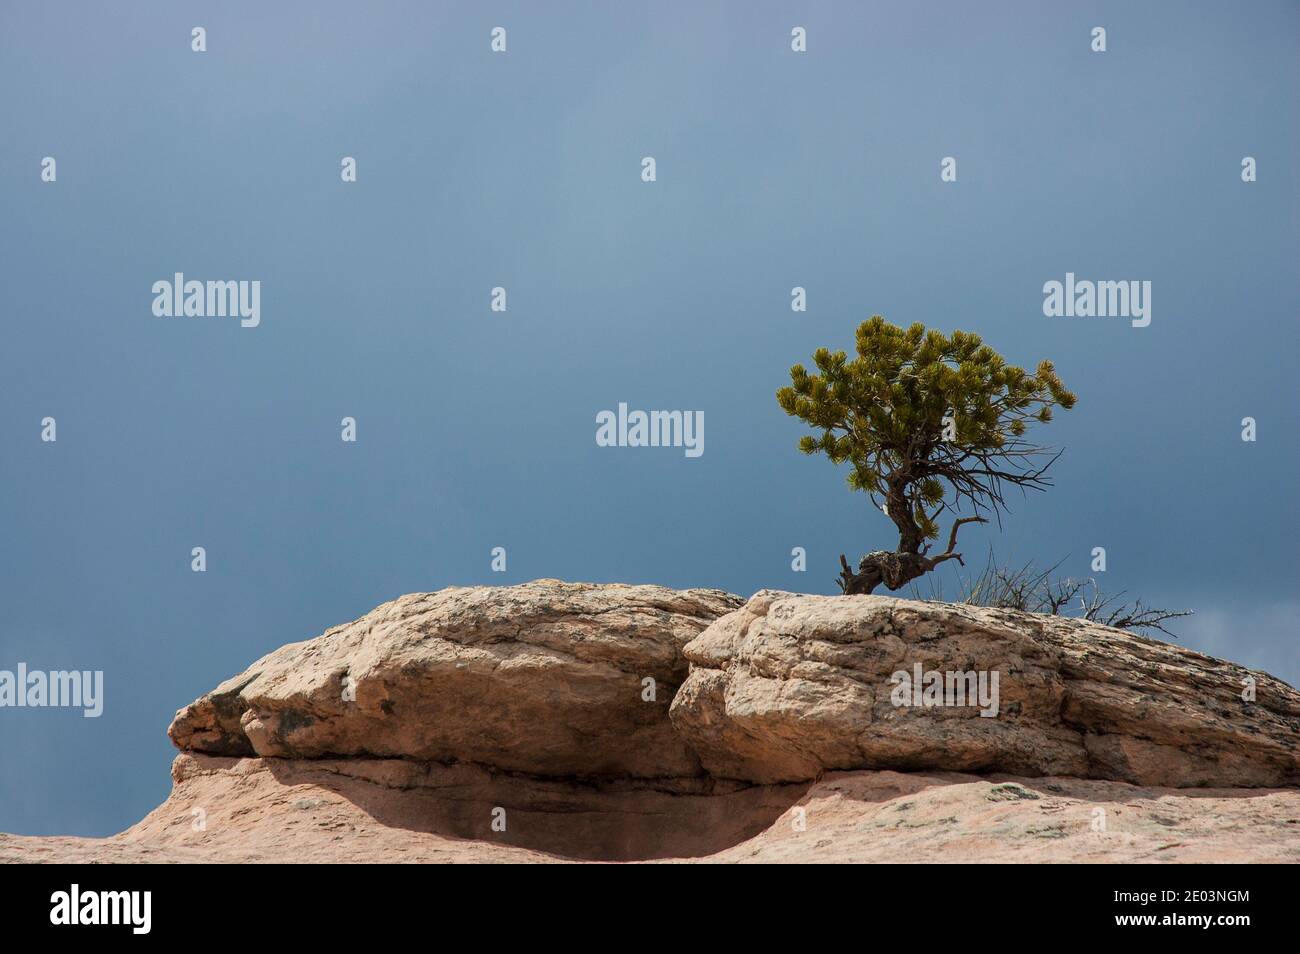 Piñon (pinyon) pine growing in the rock, Rattlesnake Canyon, Black Ridge Wilderness Area, McInnis Canyons National Conservation Area, Grand Junction, Stock Photo